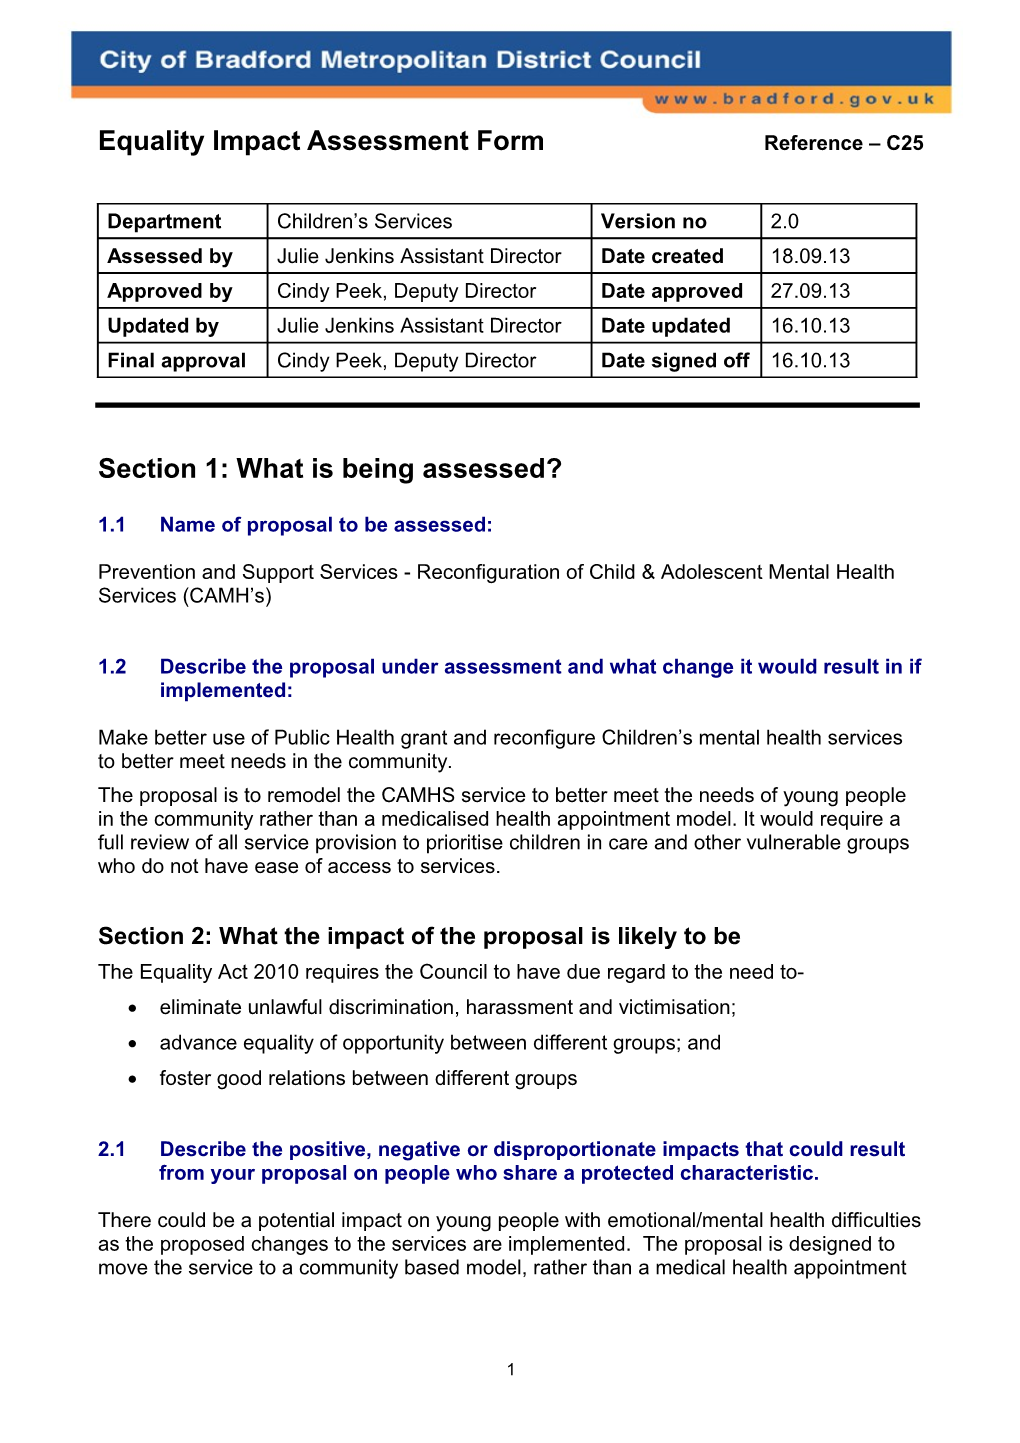 Section 1: What Is Being Assessed?